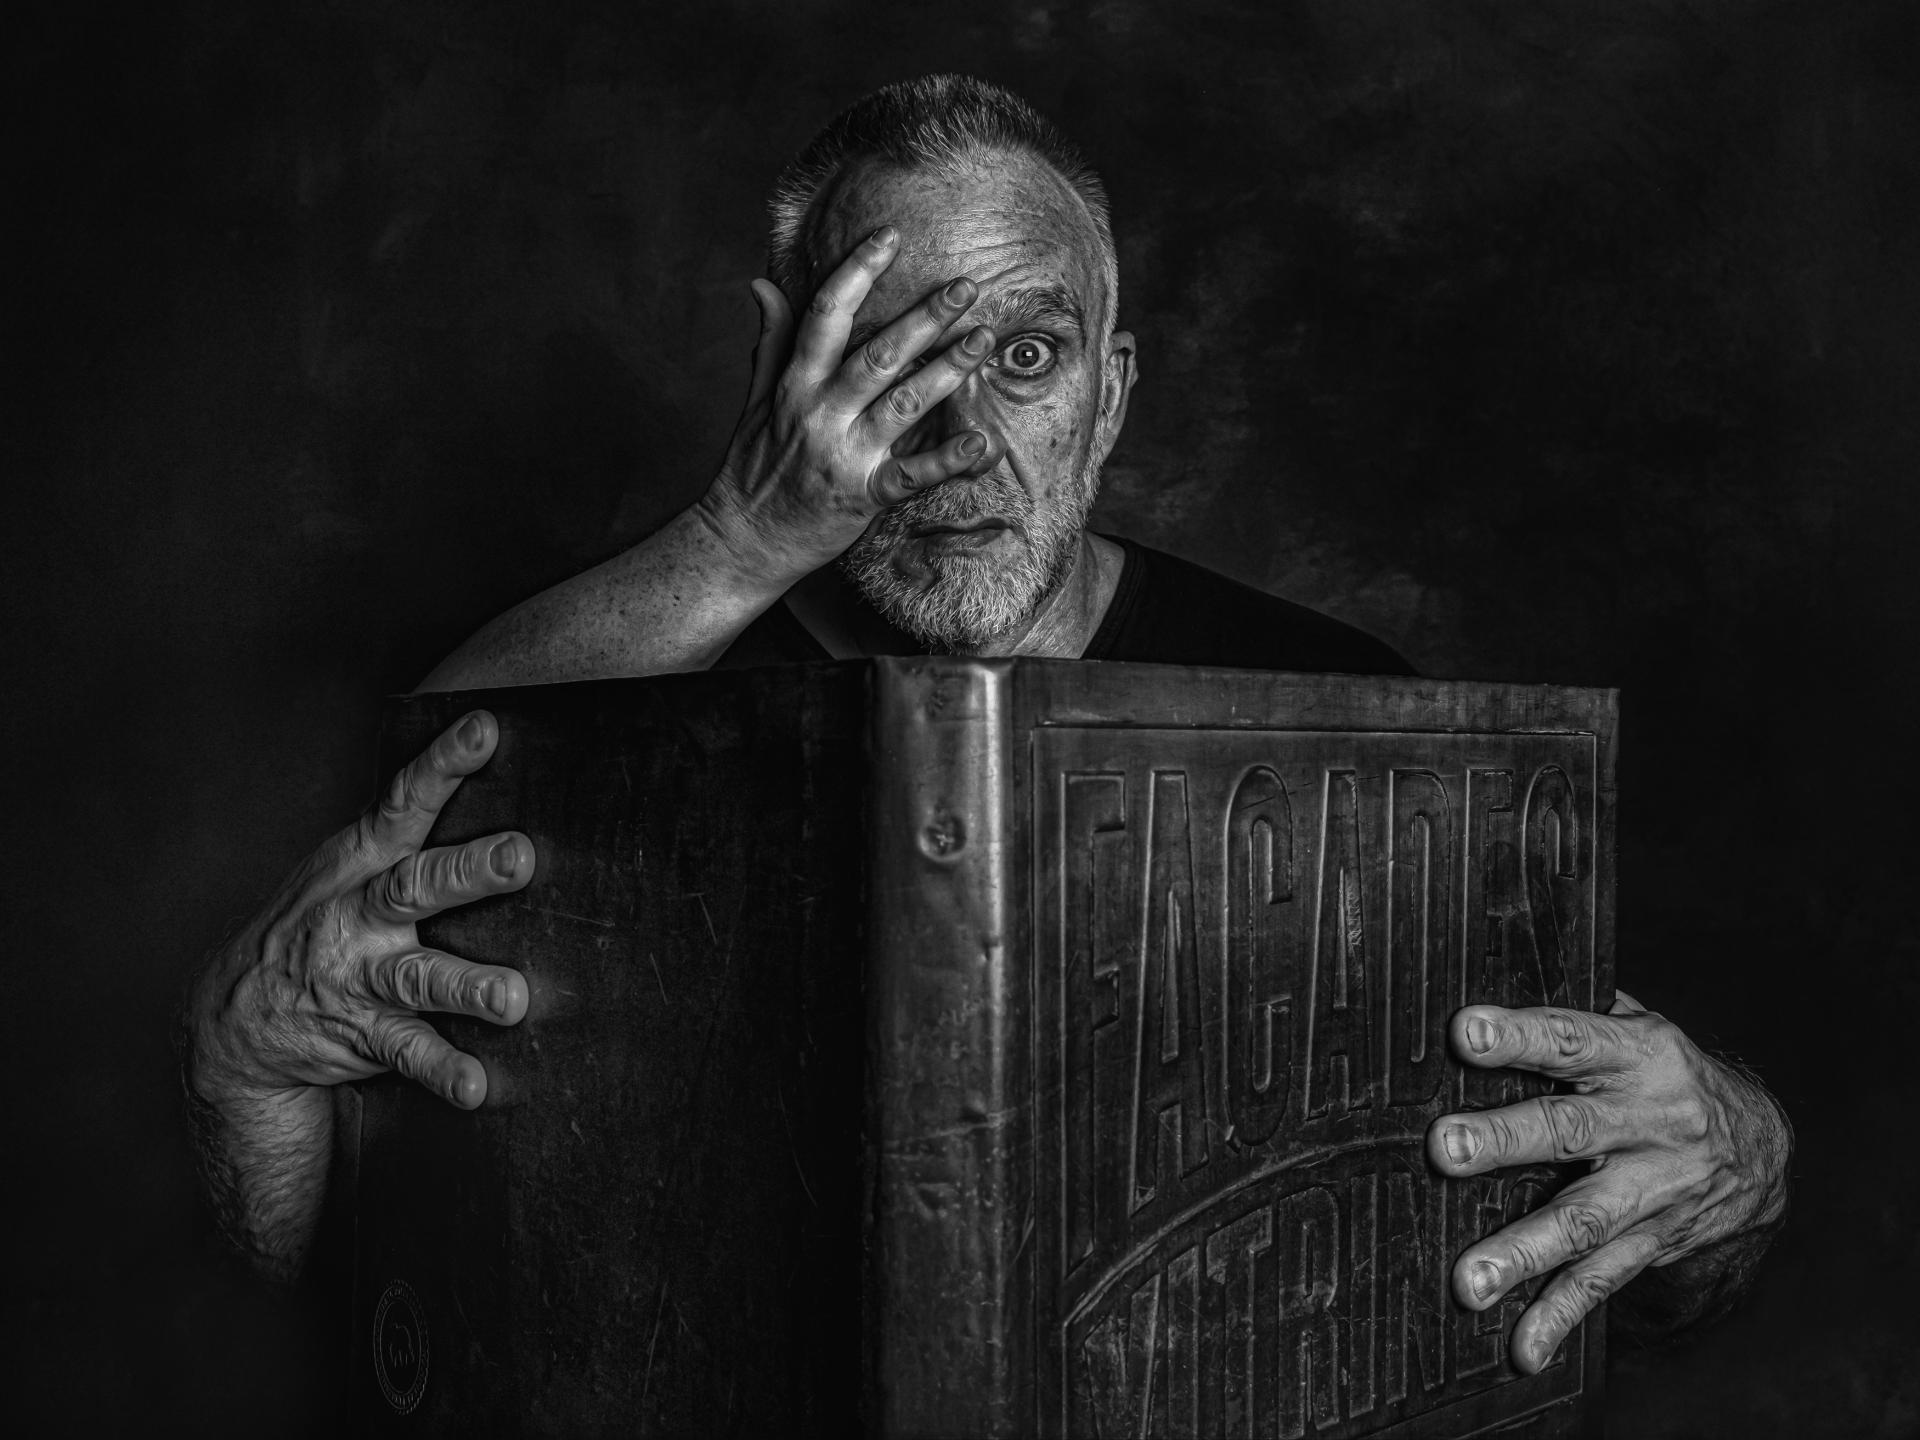 European Photography Awards Winner - Under the spell of a book